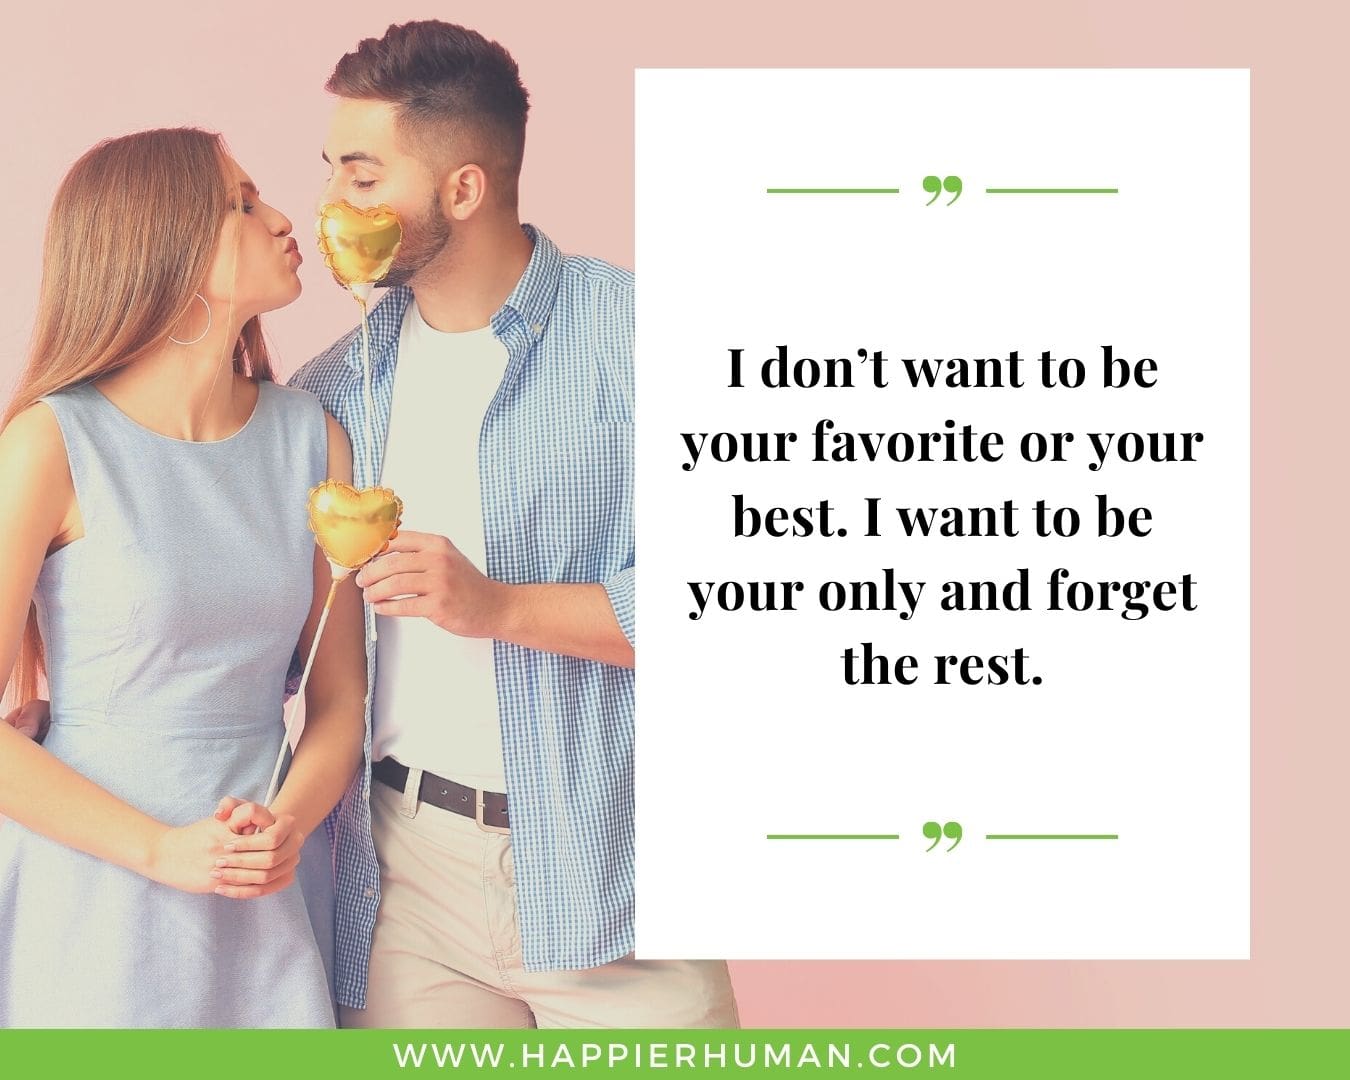 Best Love Quotes for women - “I don’t want to be your favorite or your best. I want to be your only and forget the rest.”